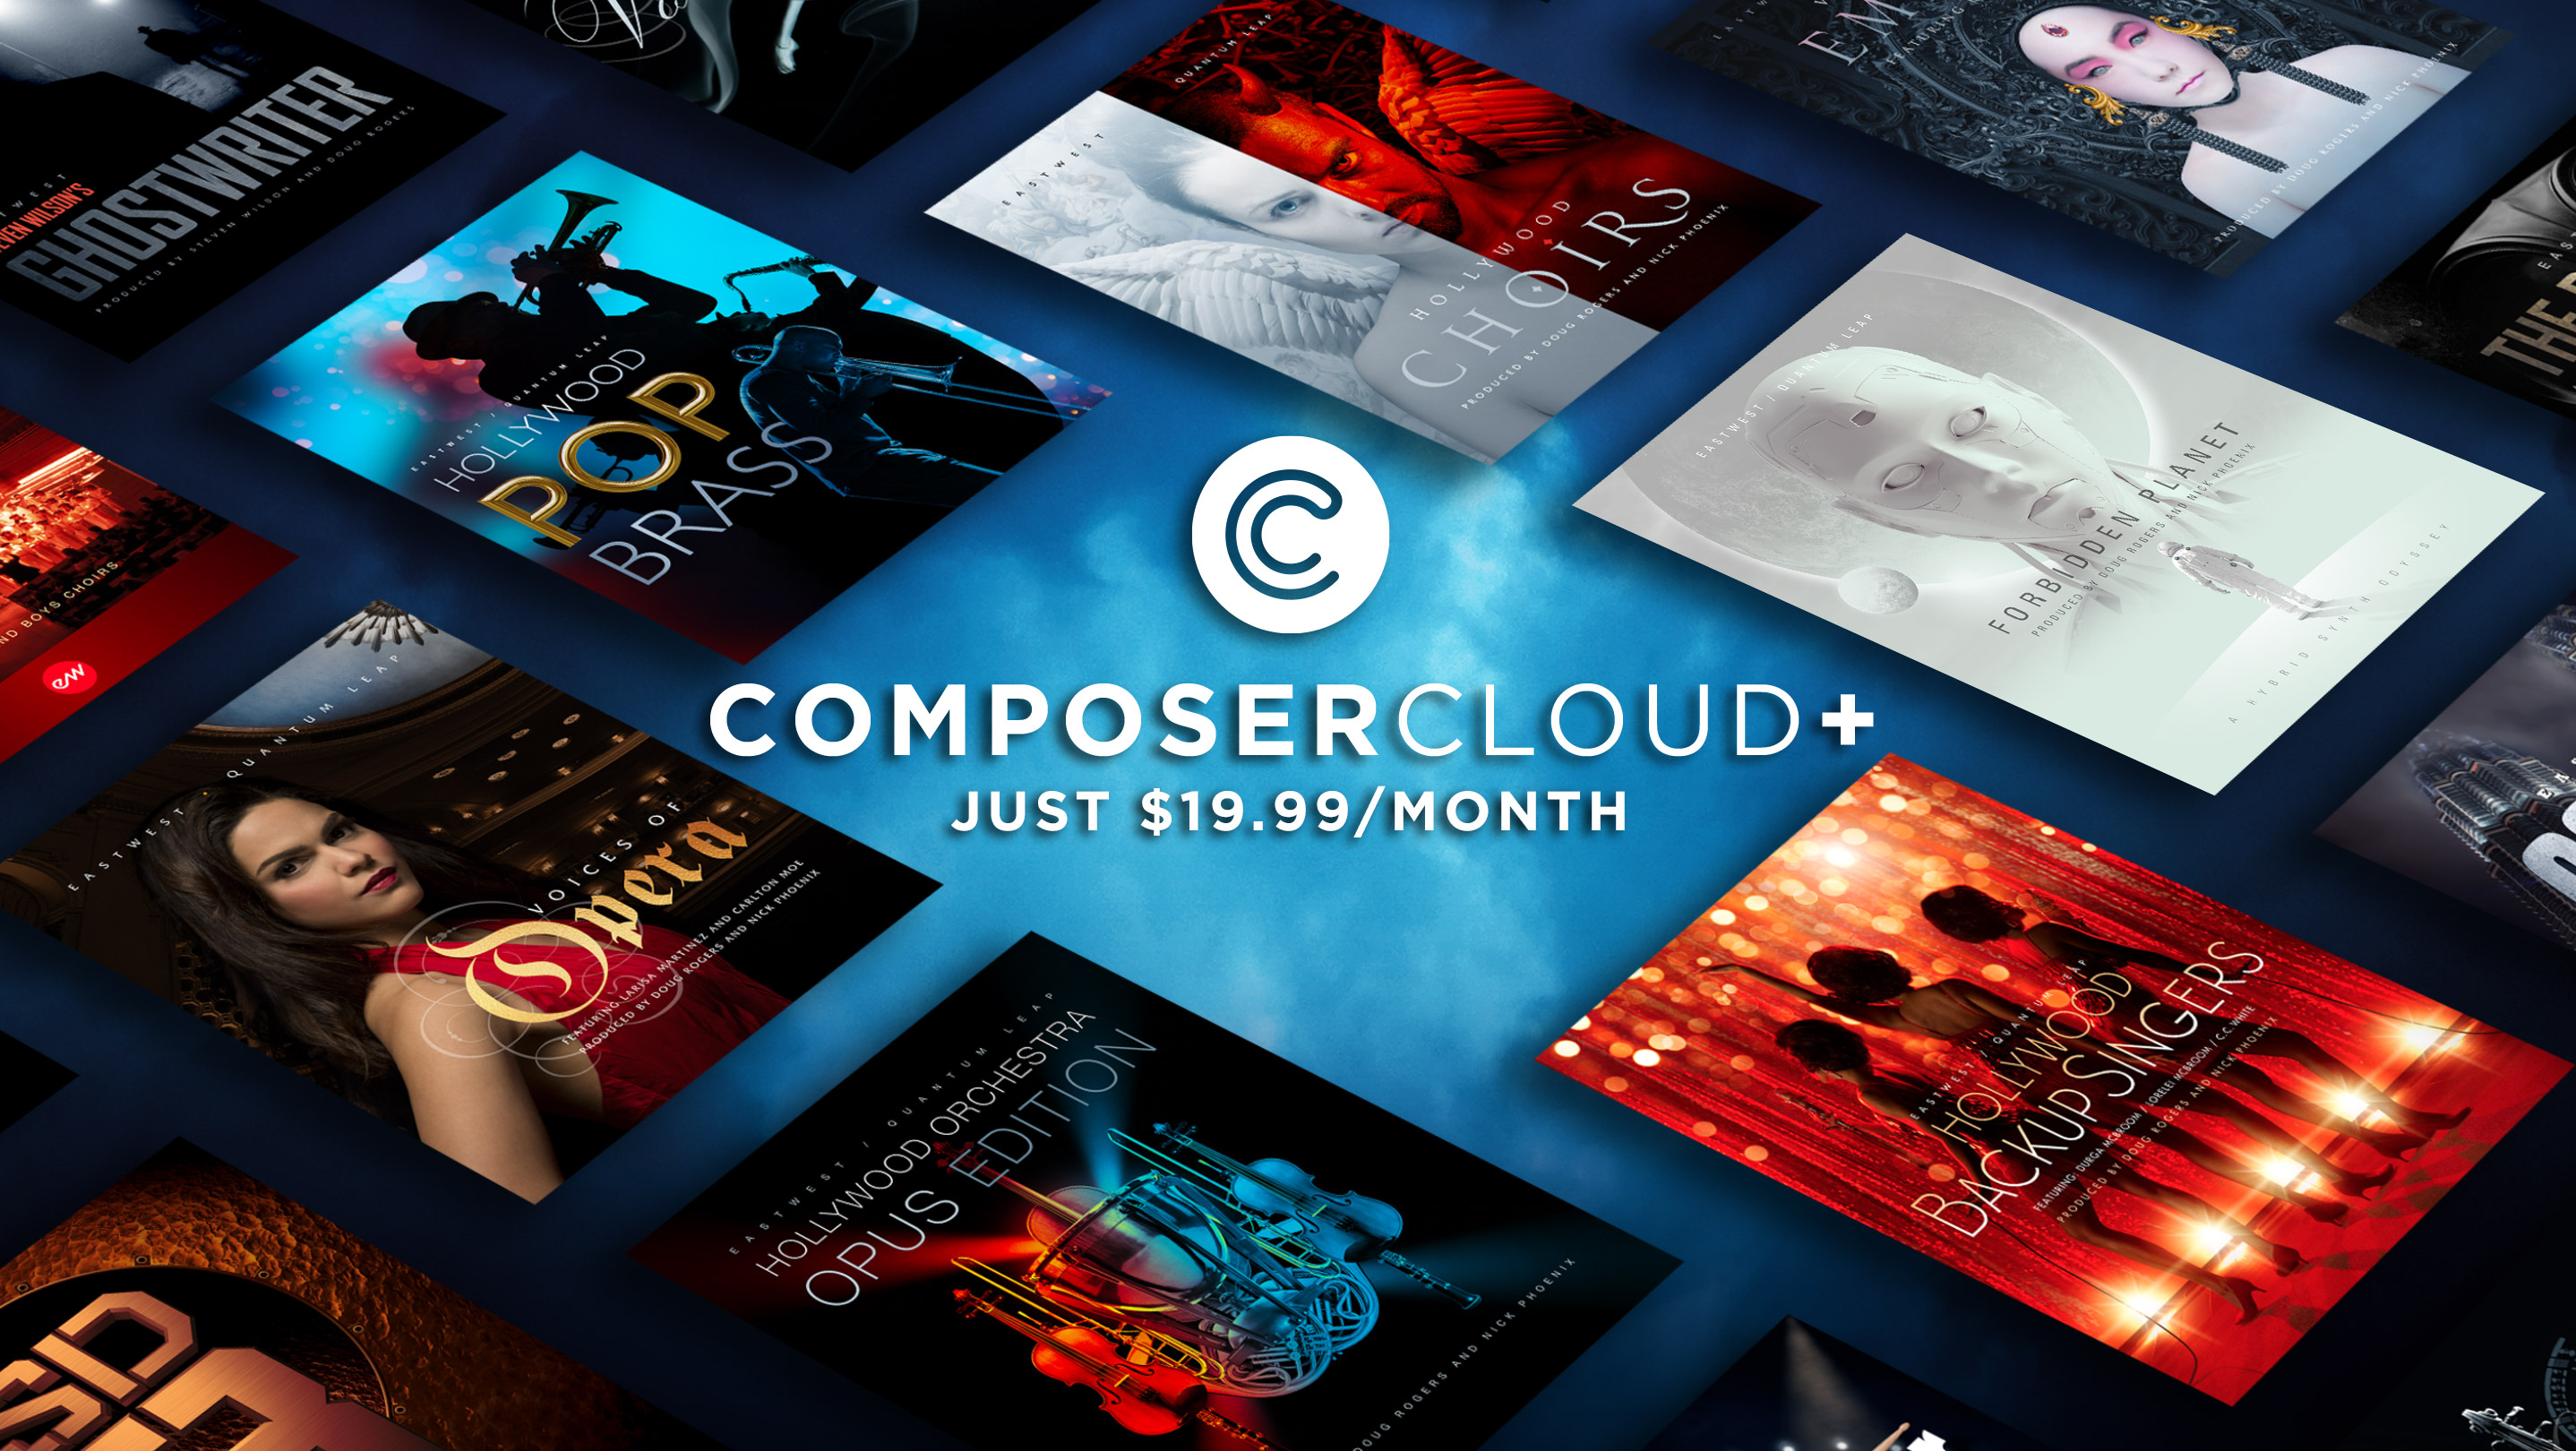 EastWest ComposerCloud+ Only $19.99/month